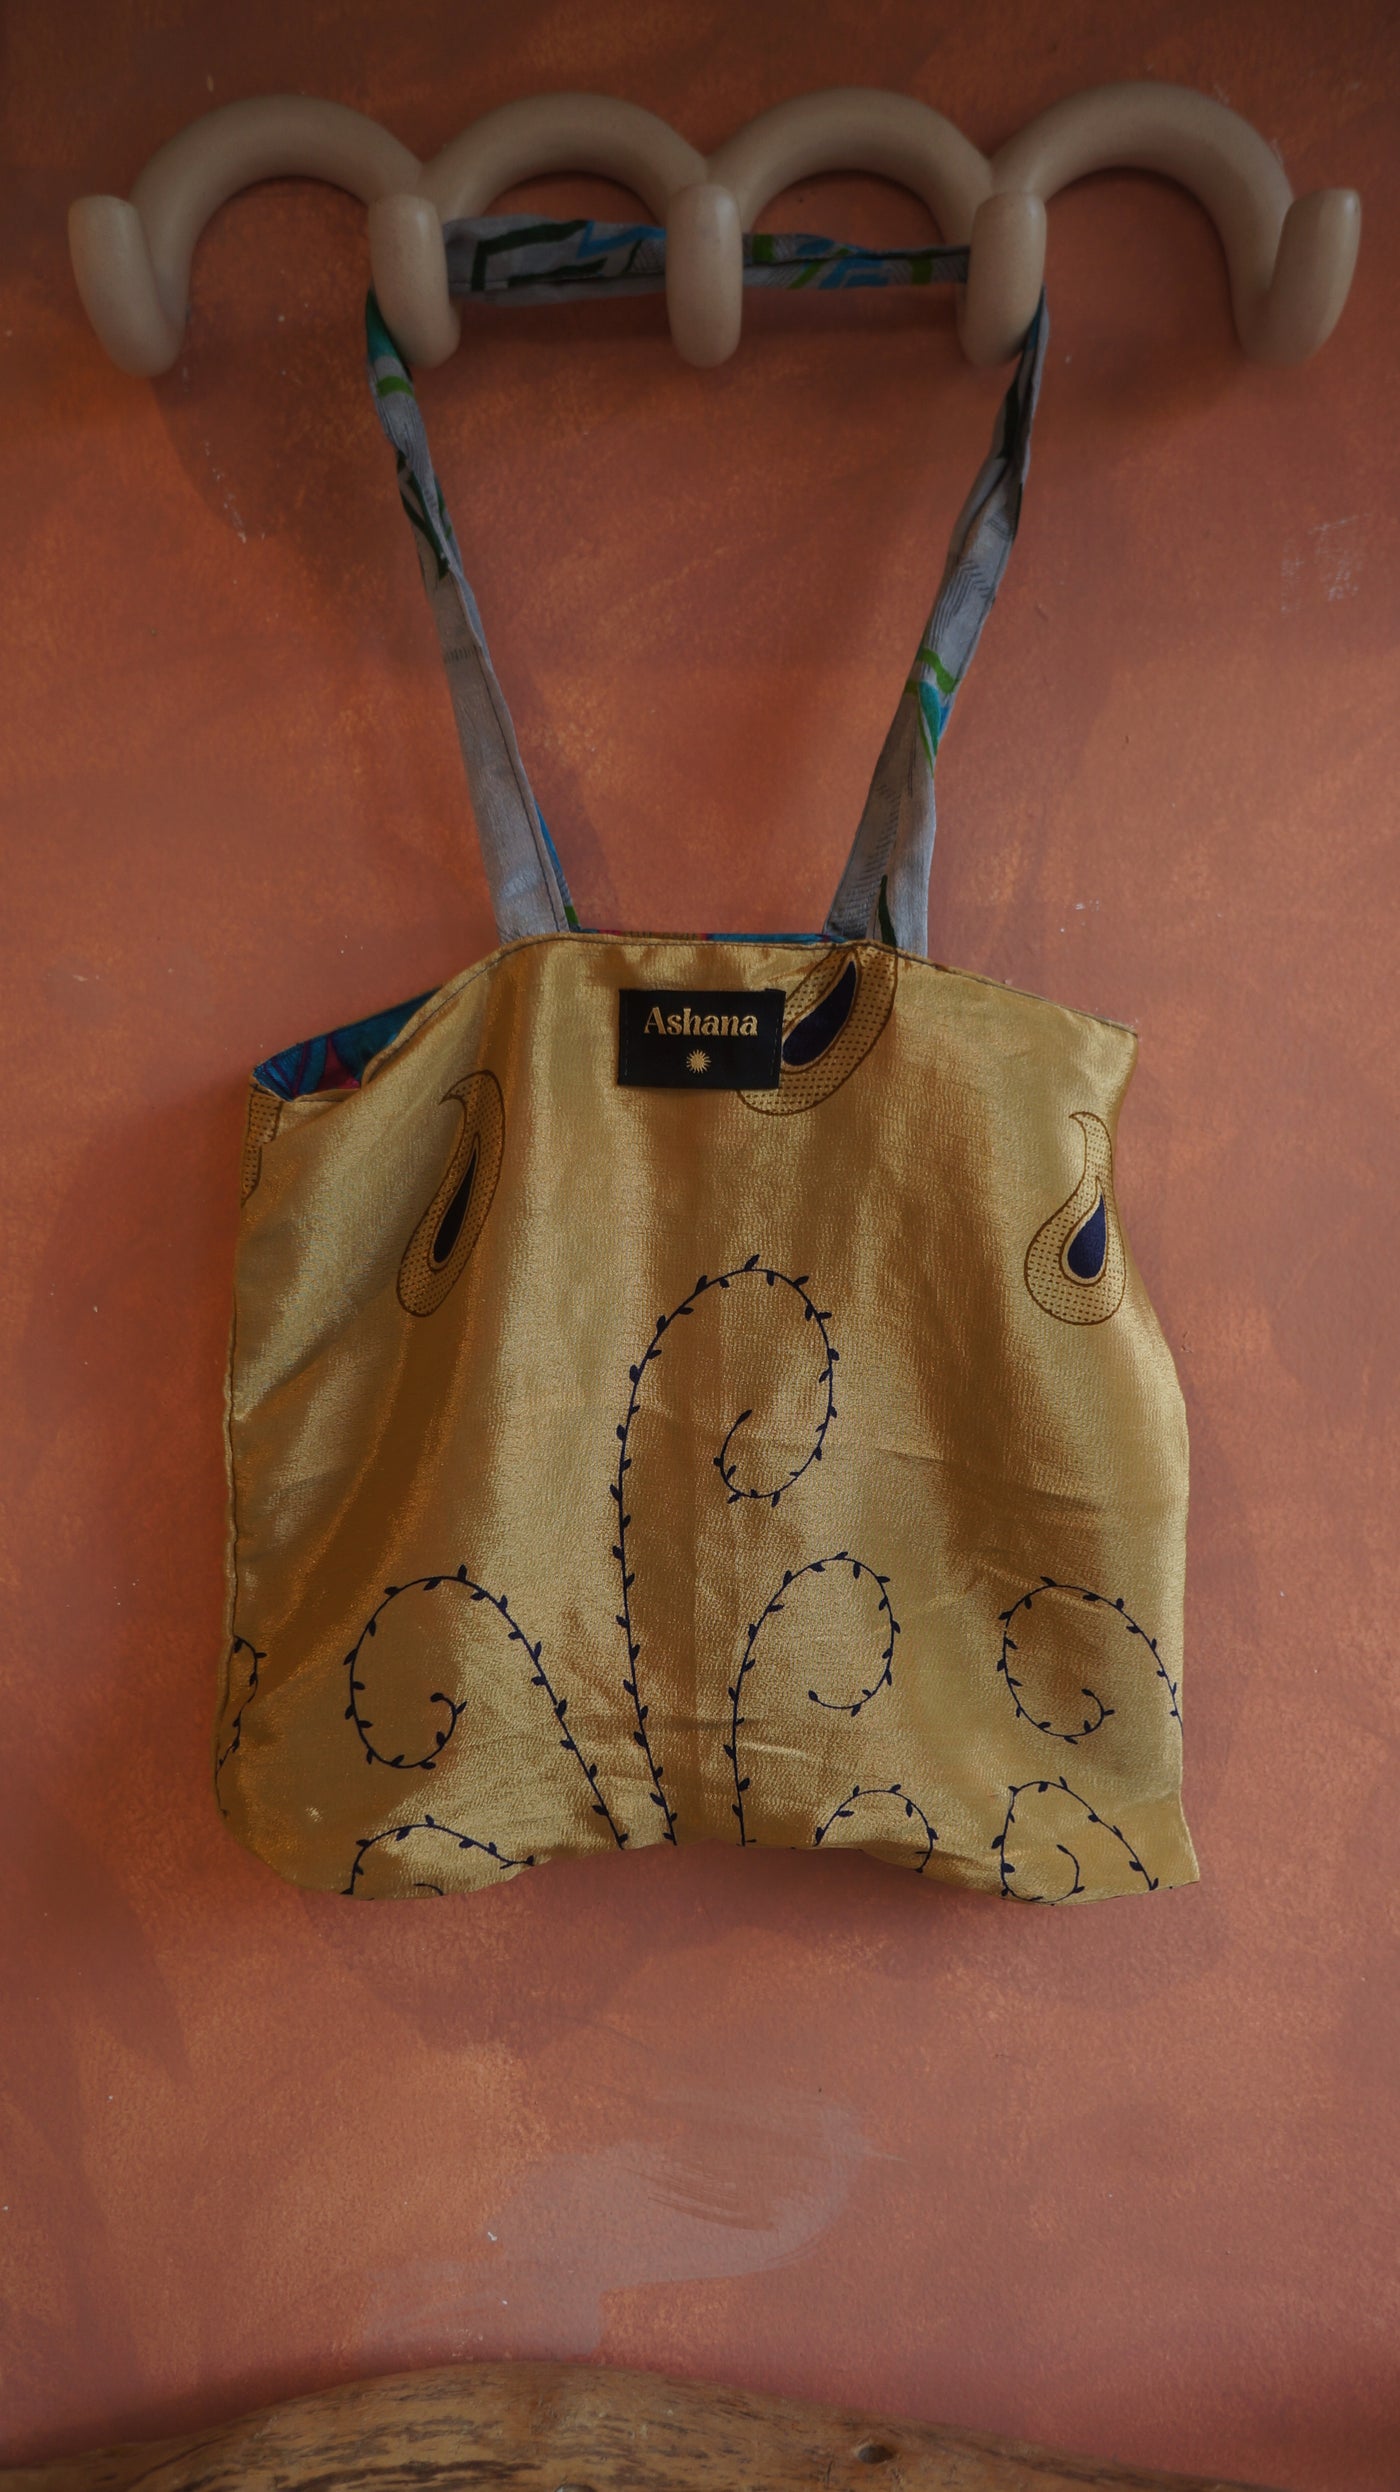 Chiquito Silk Bag - Brown and Blue Orange (CH2439)